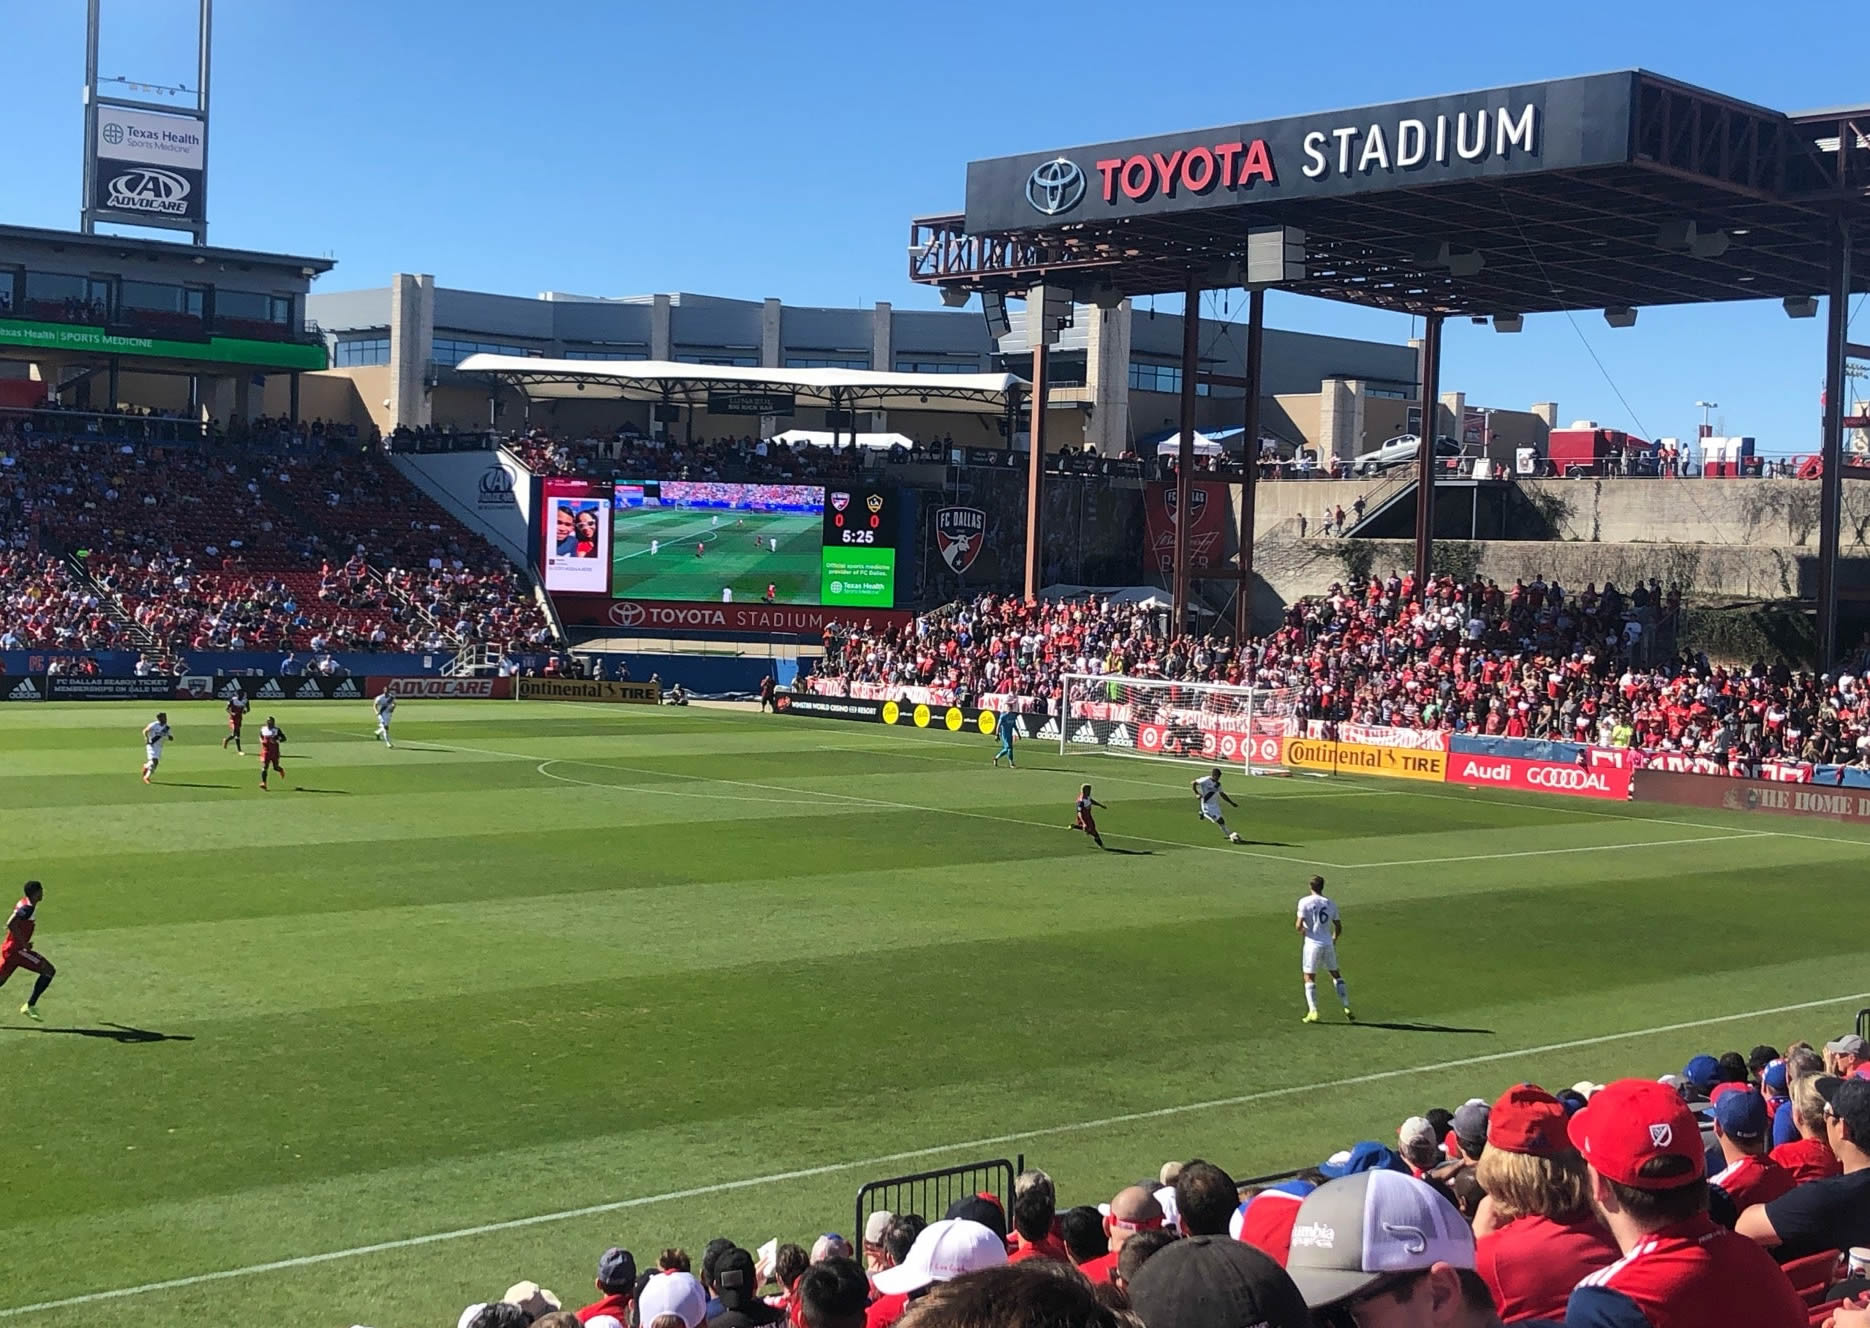 section 128, row 14 seat view  for soccer - toyota stadium